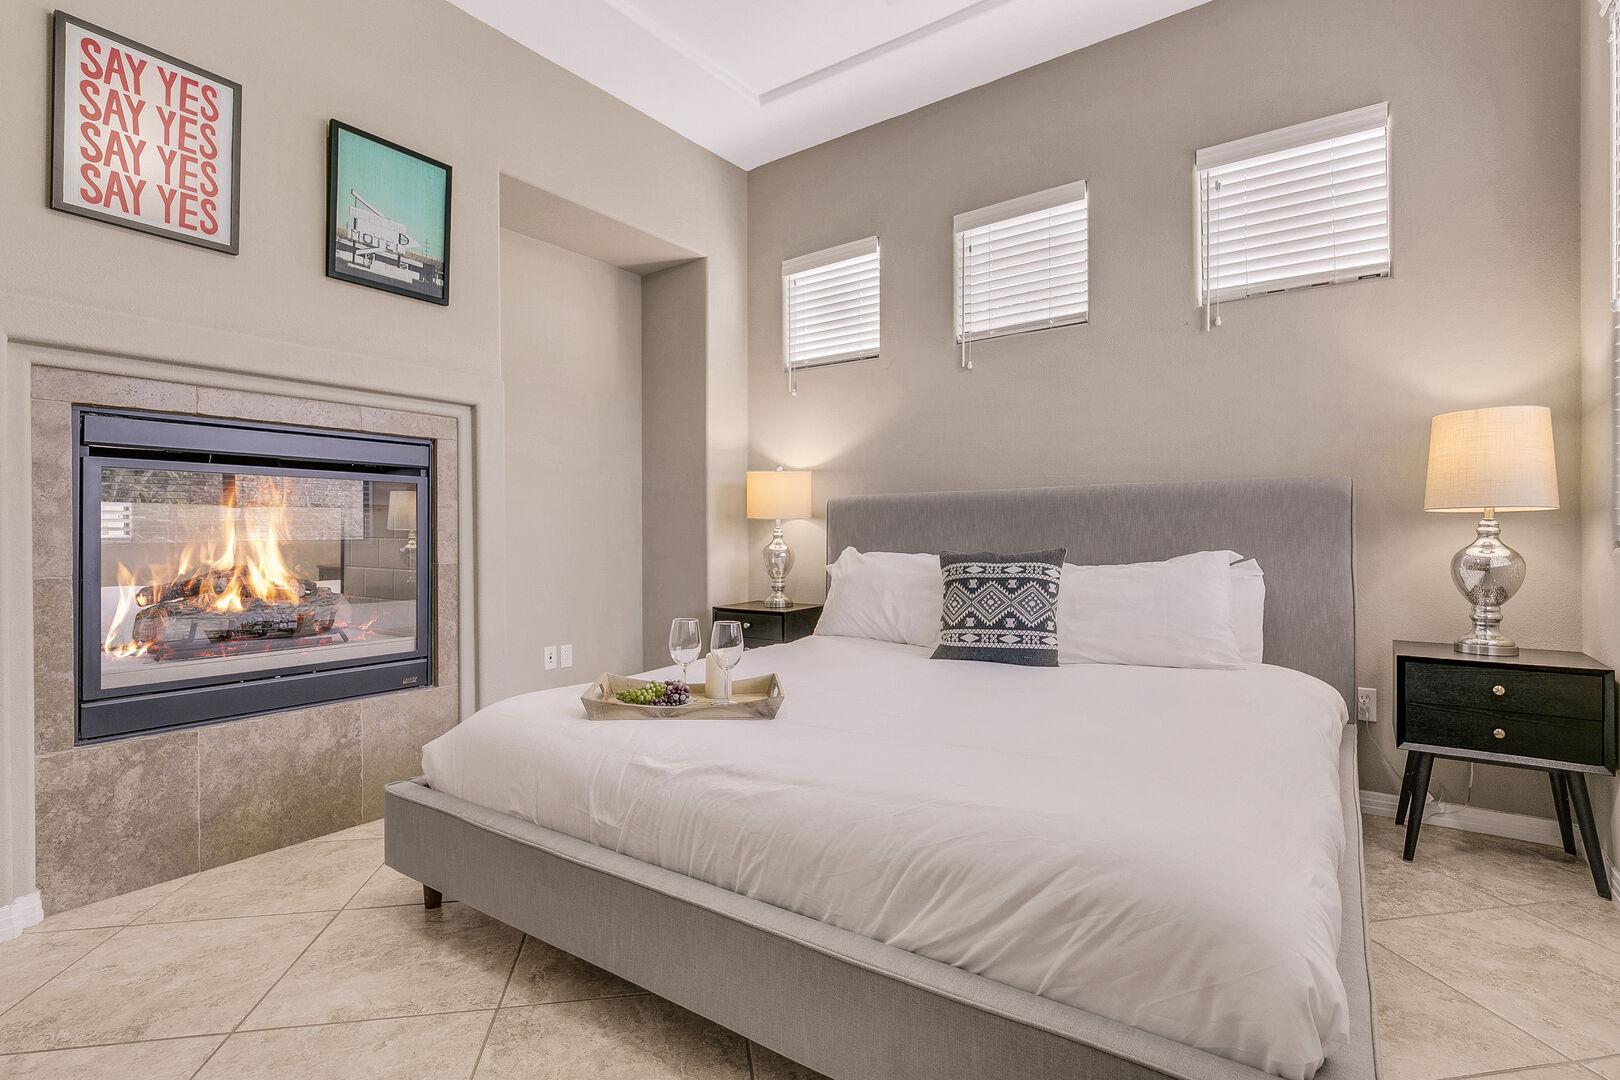 Detached Casita Suite 5 is accessible through the backyard and features two King-sized Beds and a double-sided fireplace.